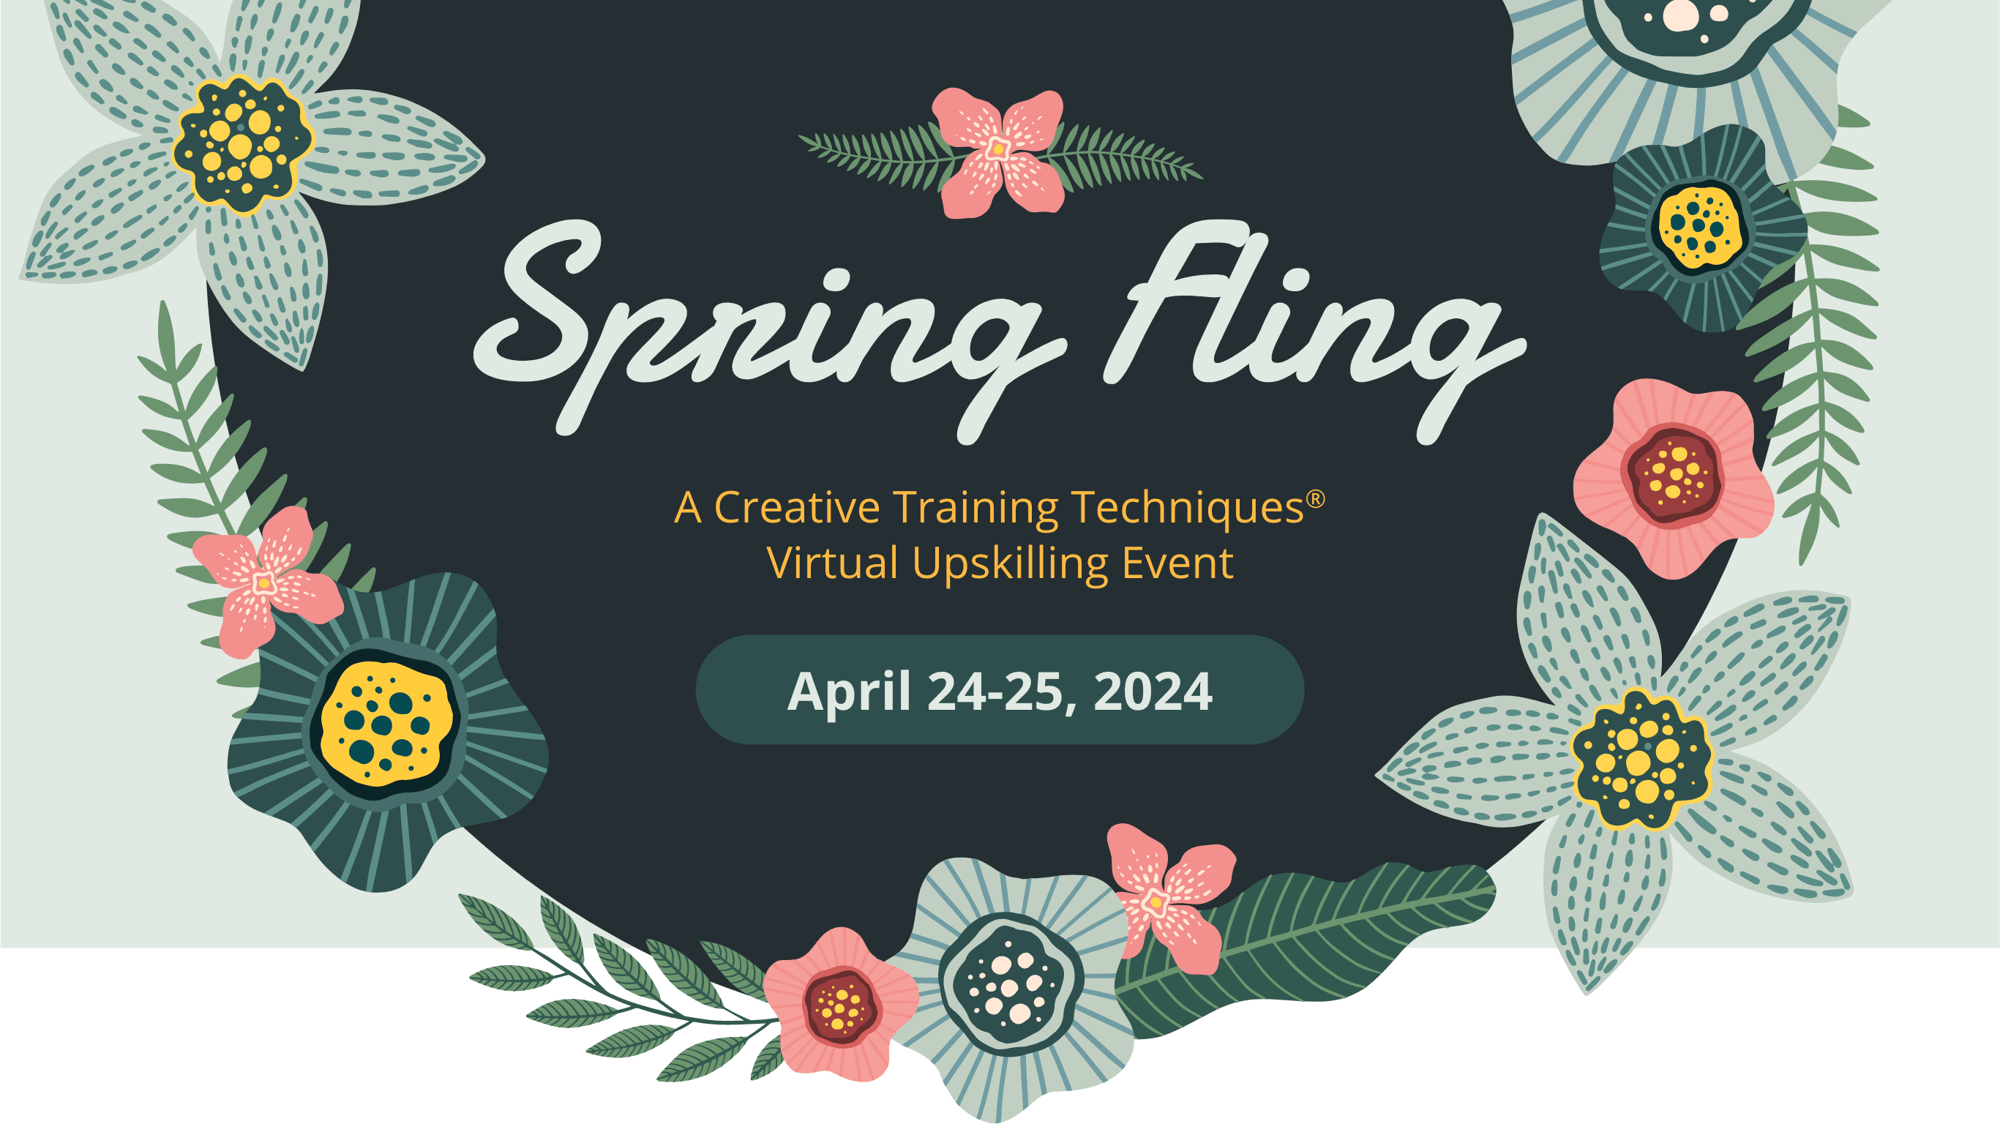 spring fling. a creative training techniques virtual upskilling event. April 24-25, 2024.